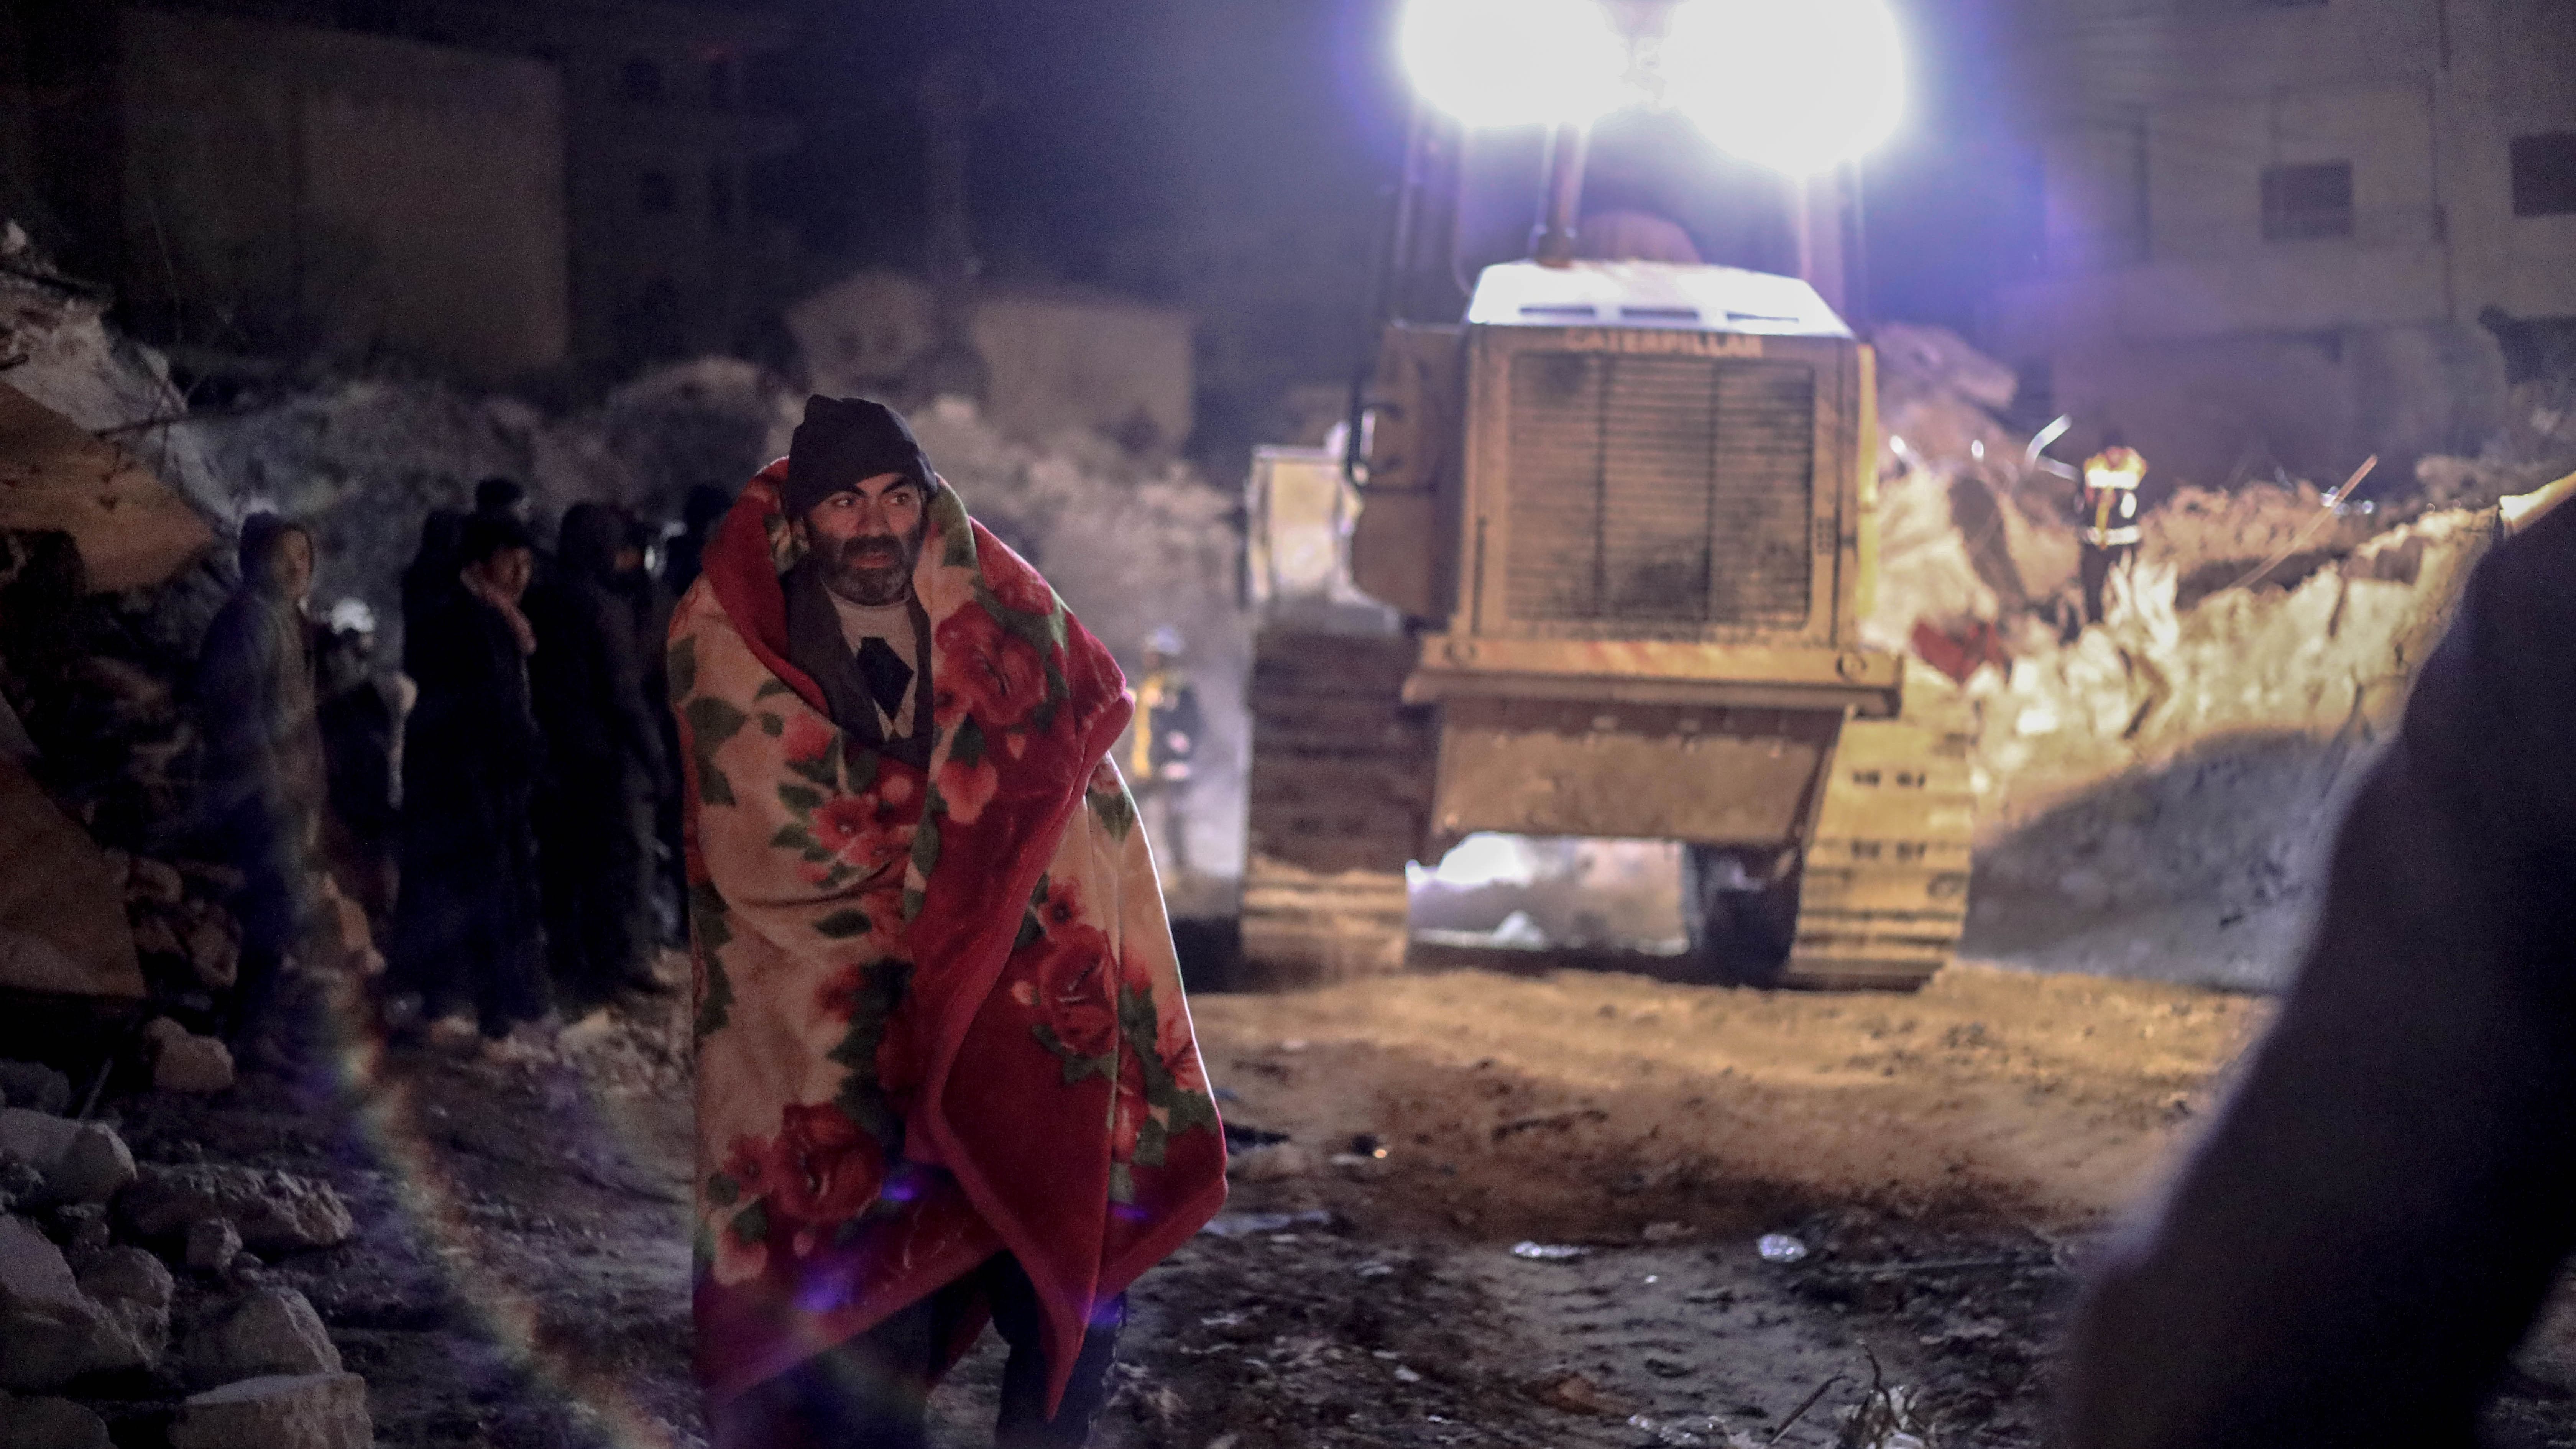 Sami Jaqir walks back and forth as emergency workers try to rescue his family trapped under rubble (MEE/